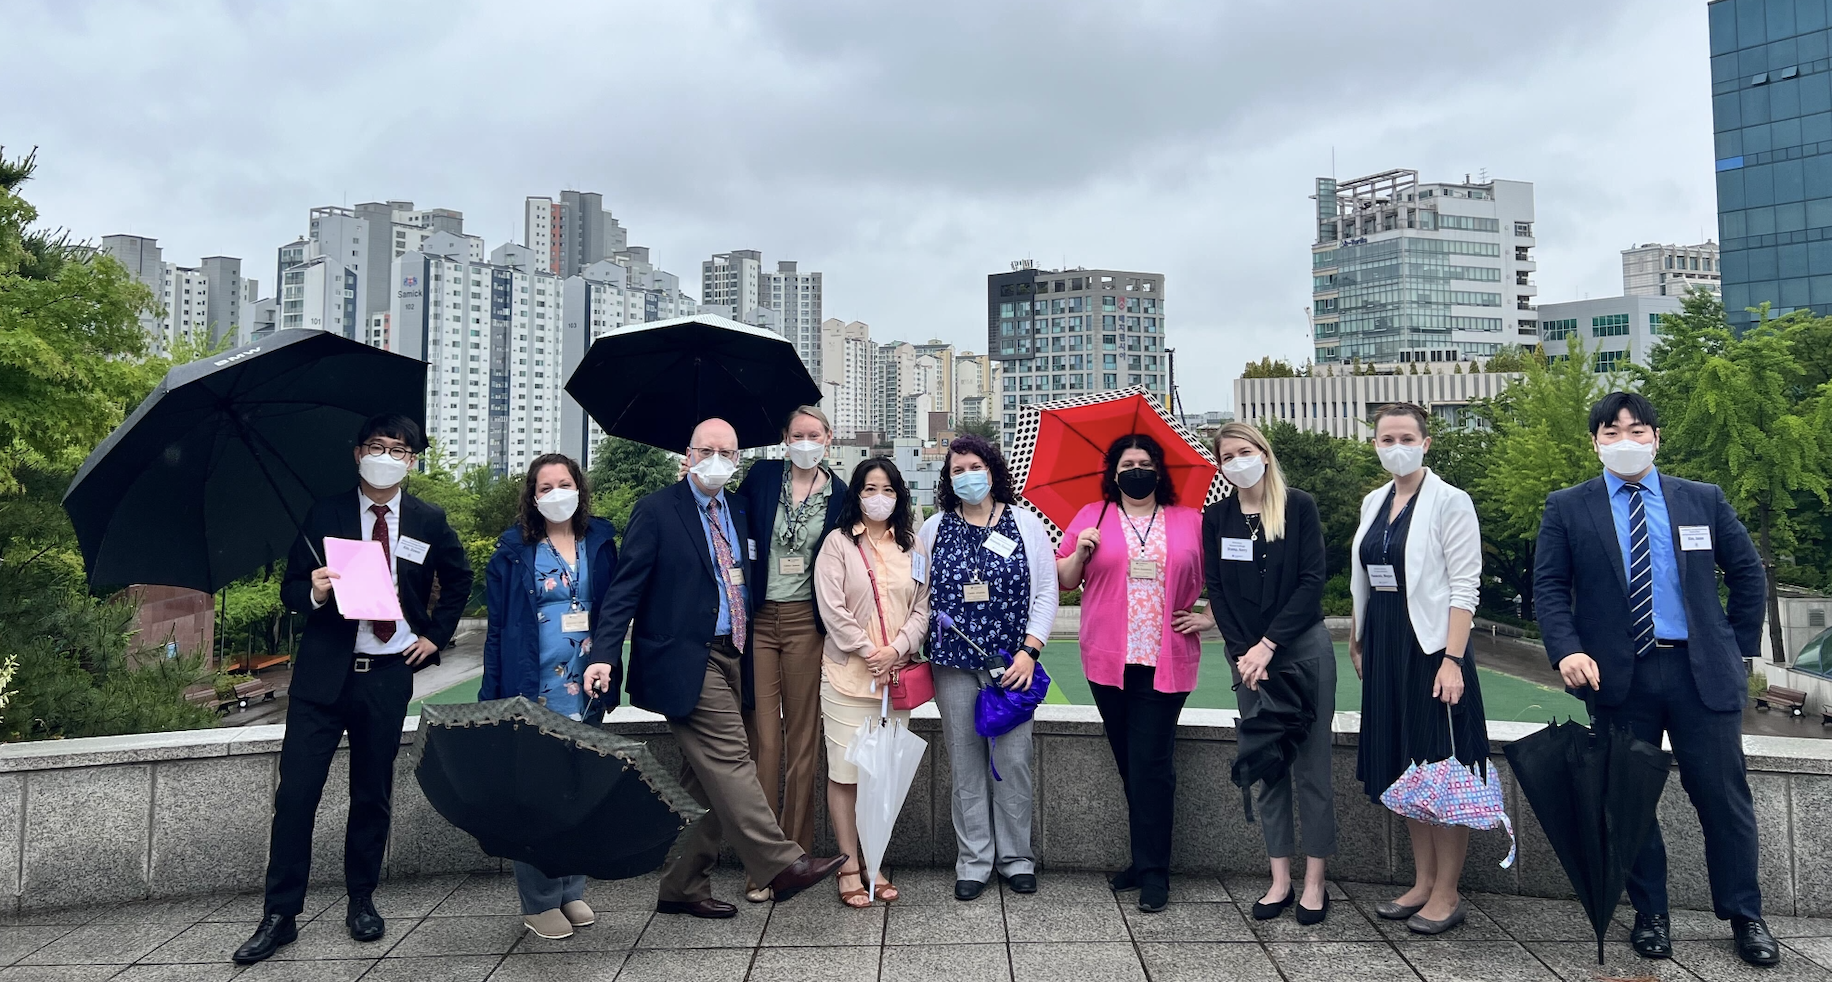 Fulbright group photo at Sogang University in Seoul